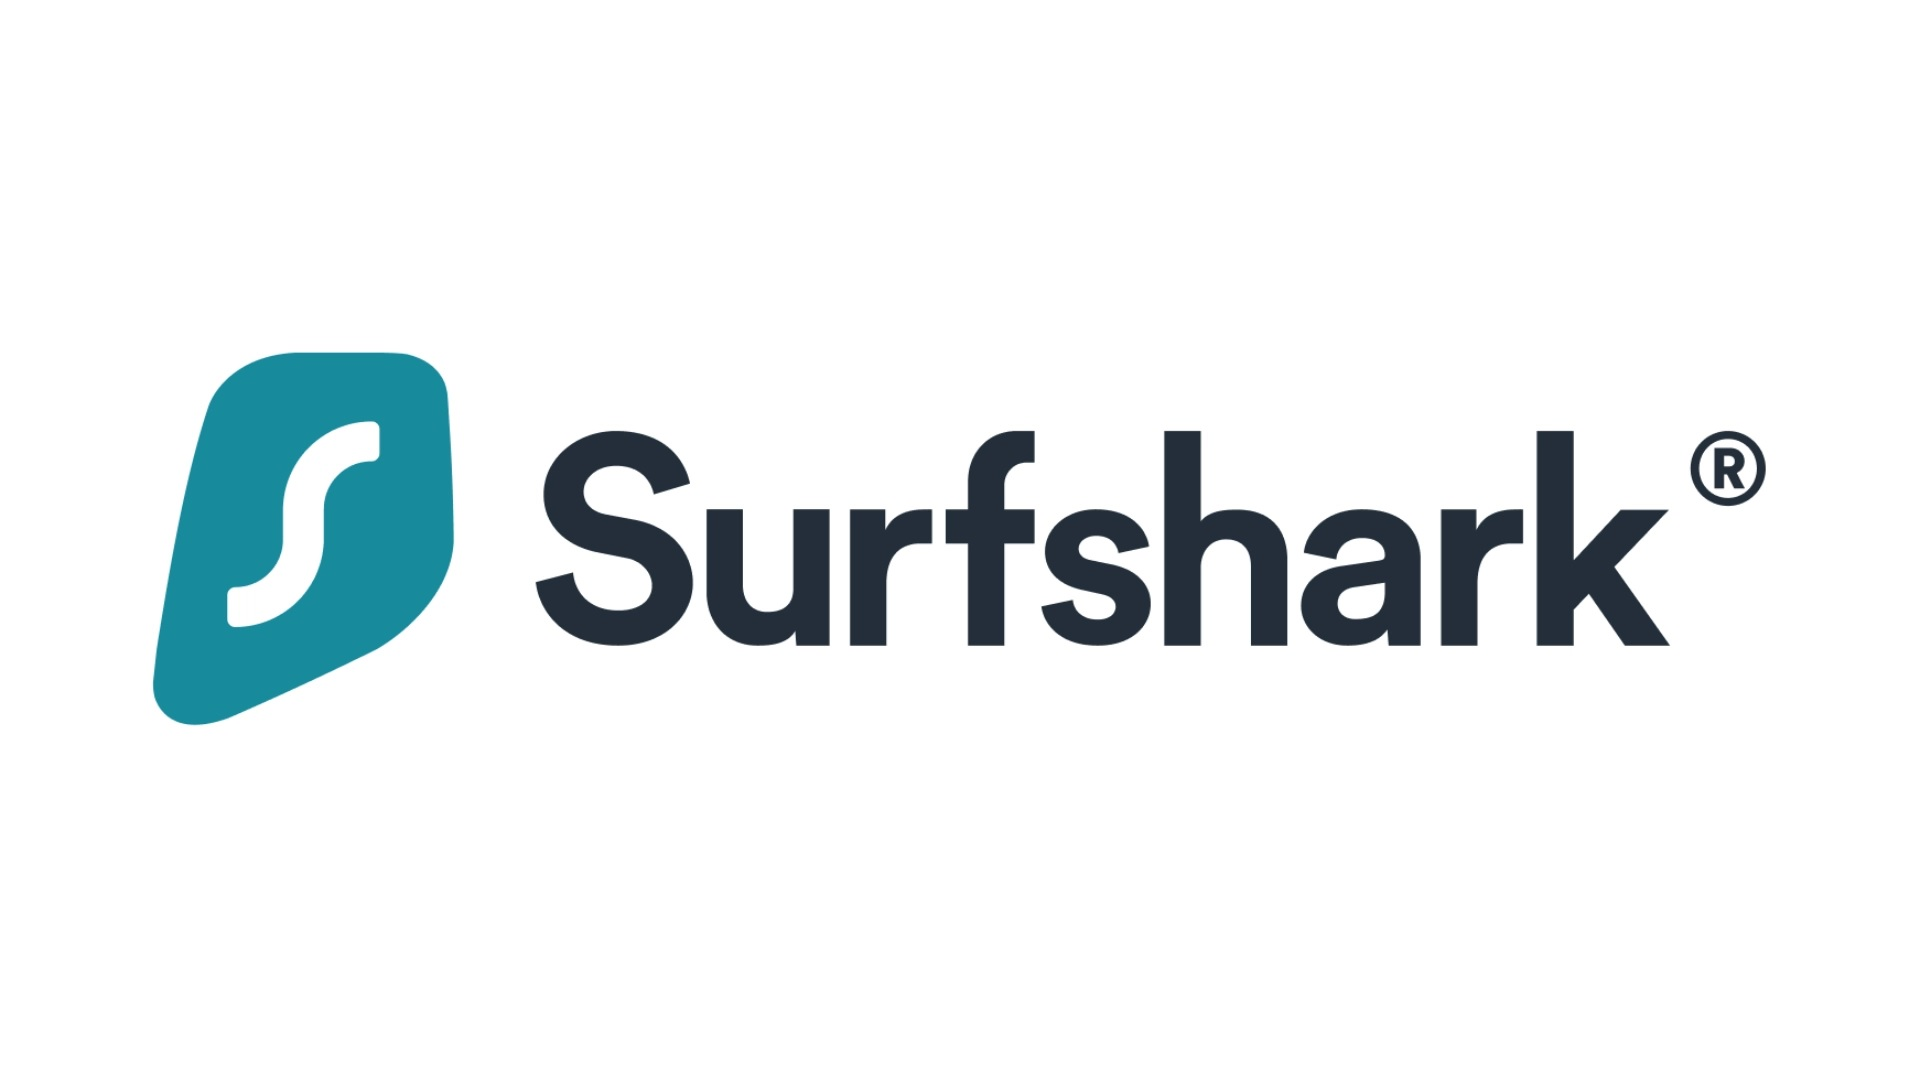 Best Mac VPN - Surfshark. The business's logo stands on a white background.